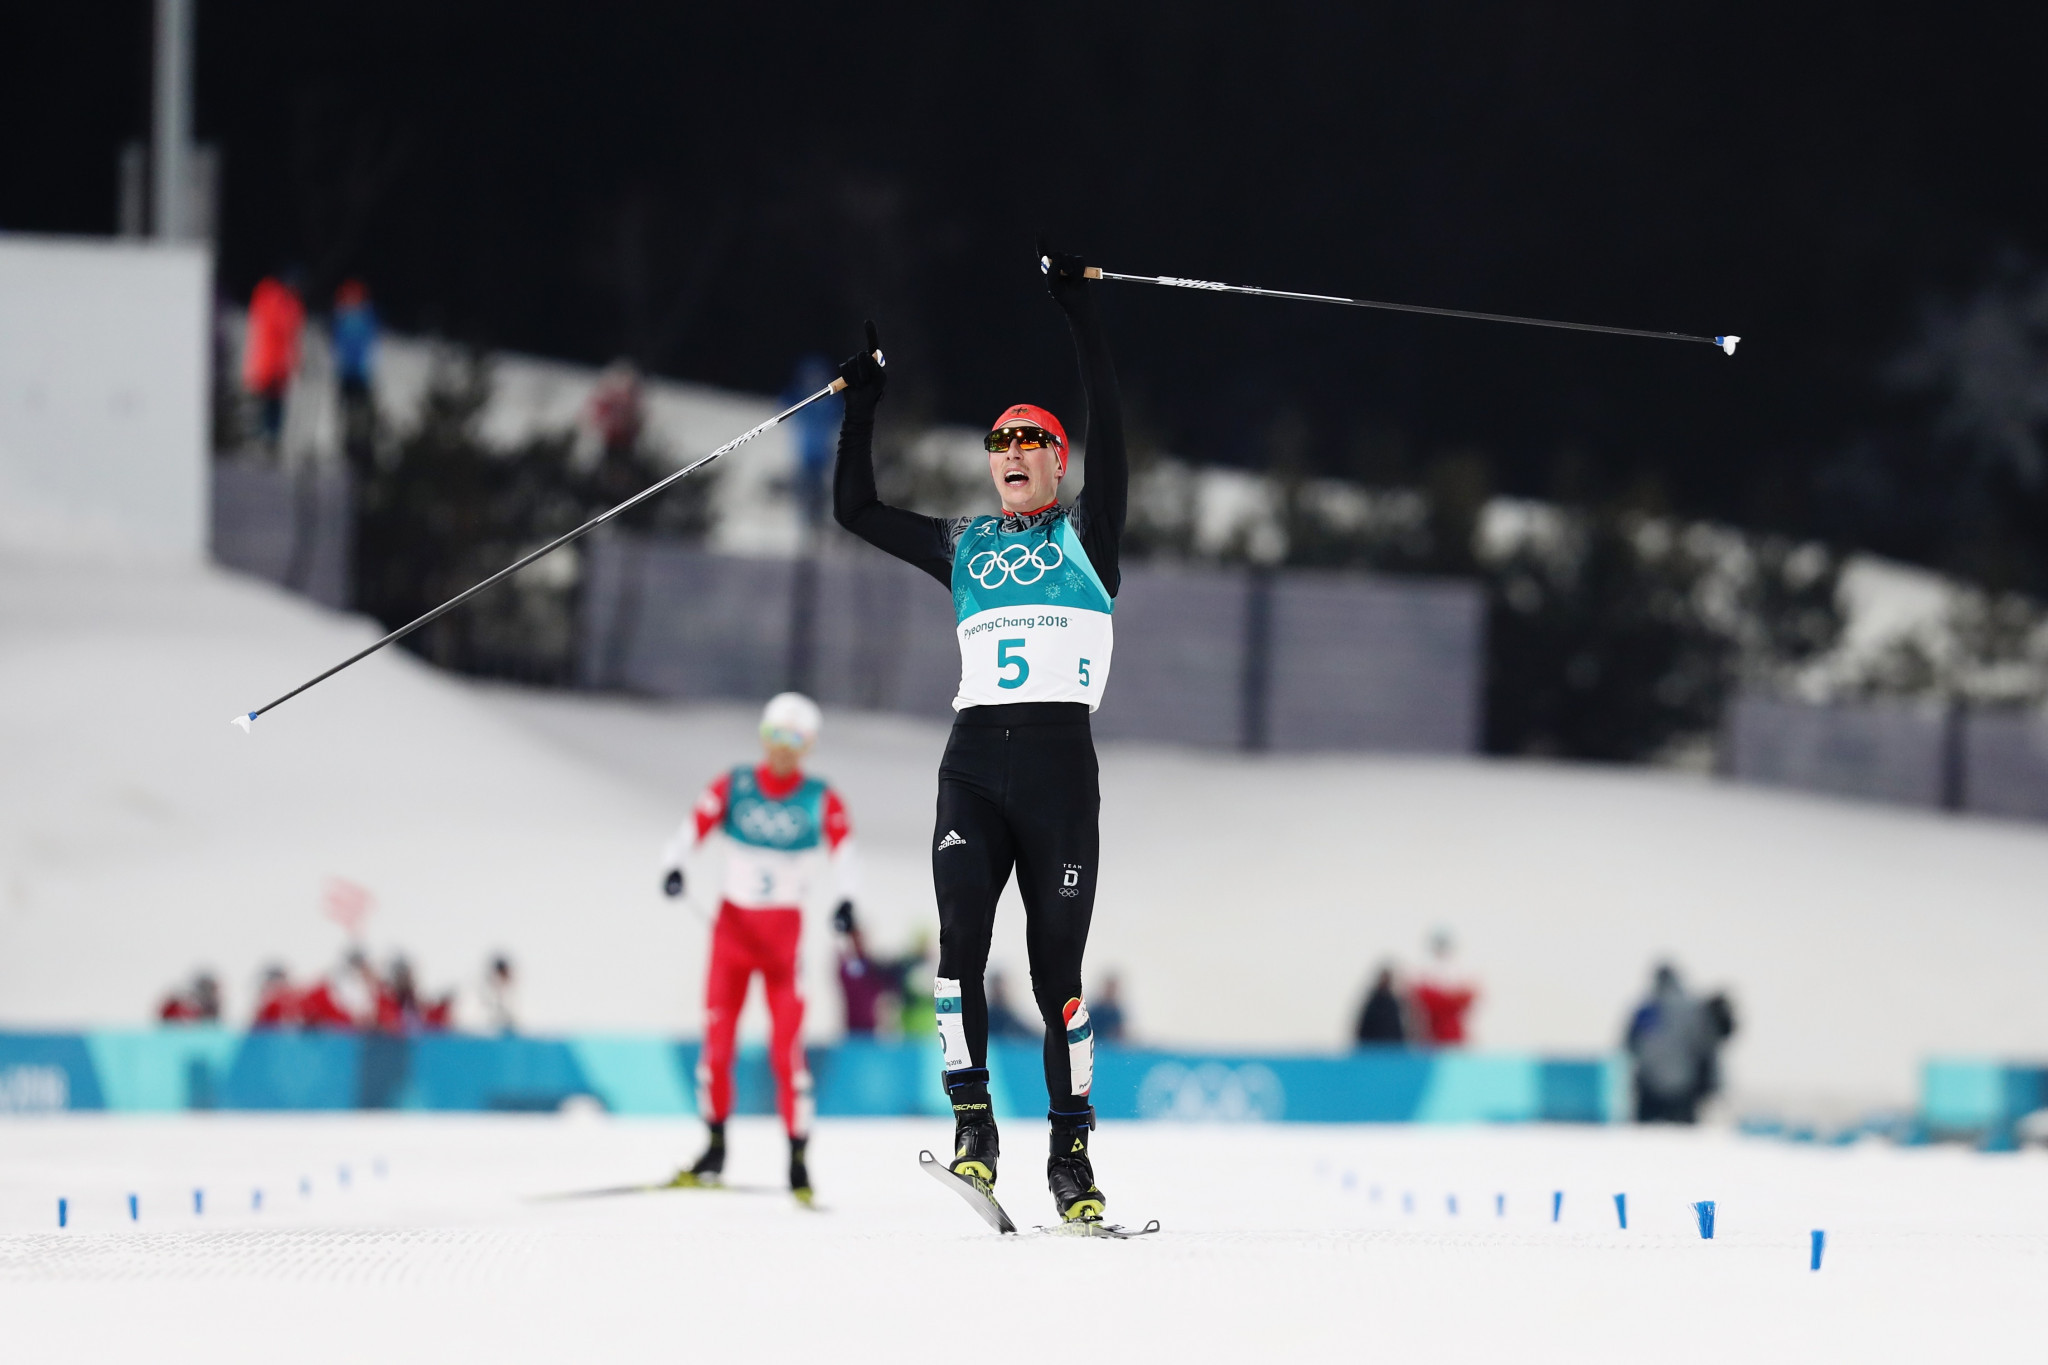 Frenzel becomes first skier to retain Olympic Nordic combined title for 38 years at Pyeongchang 2018 